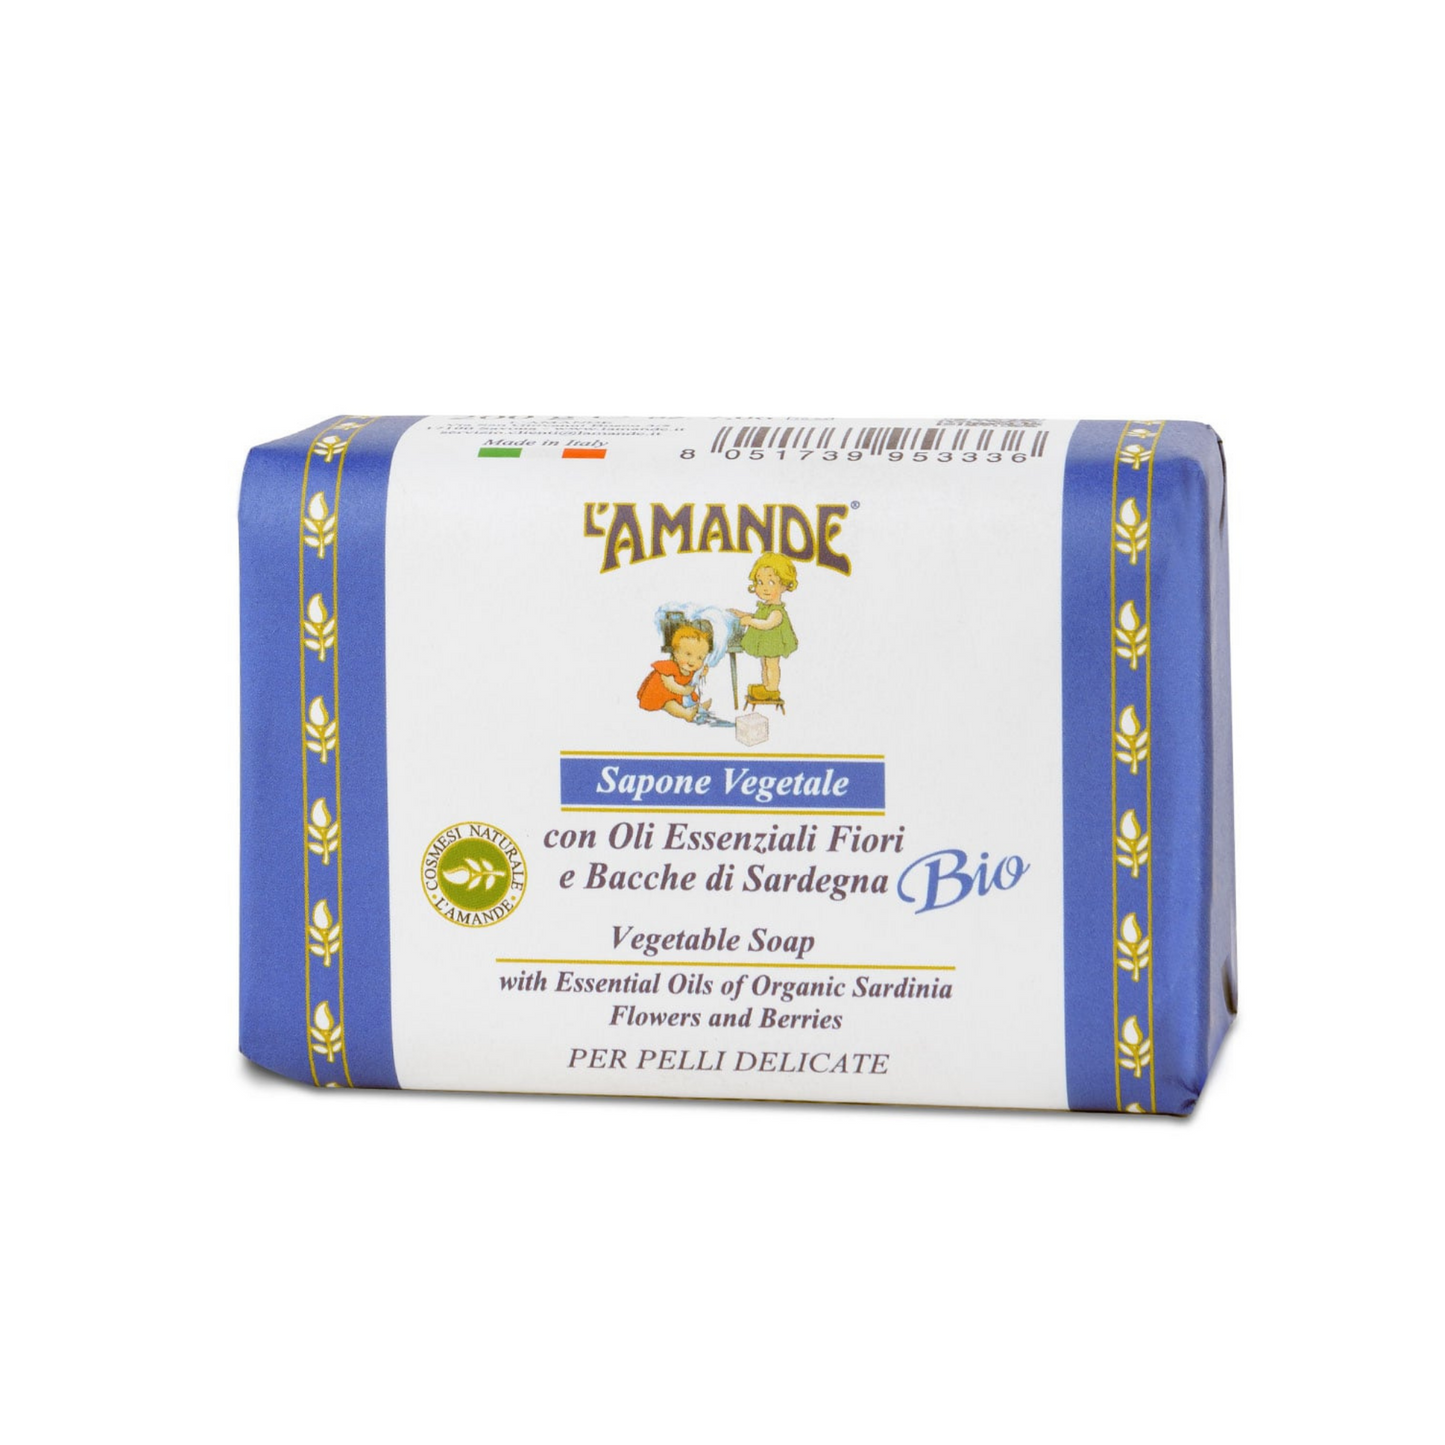 Primary Image of Flowers and Berries Bar Soap